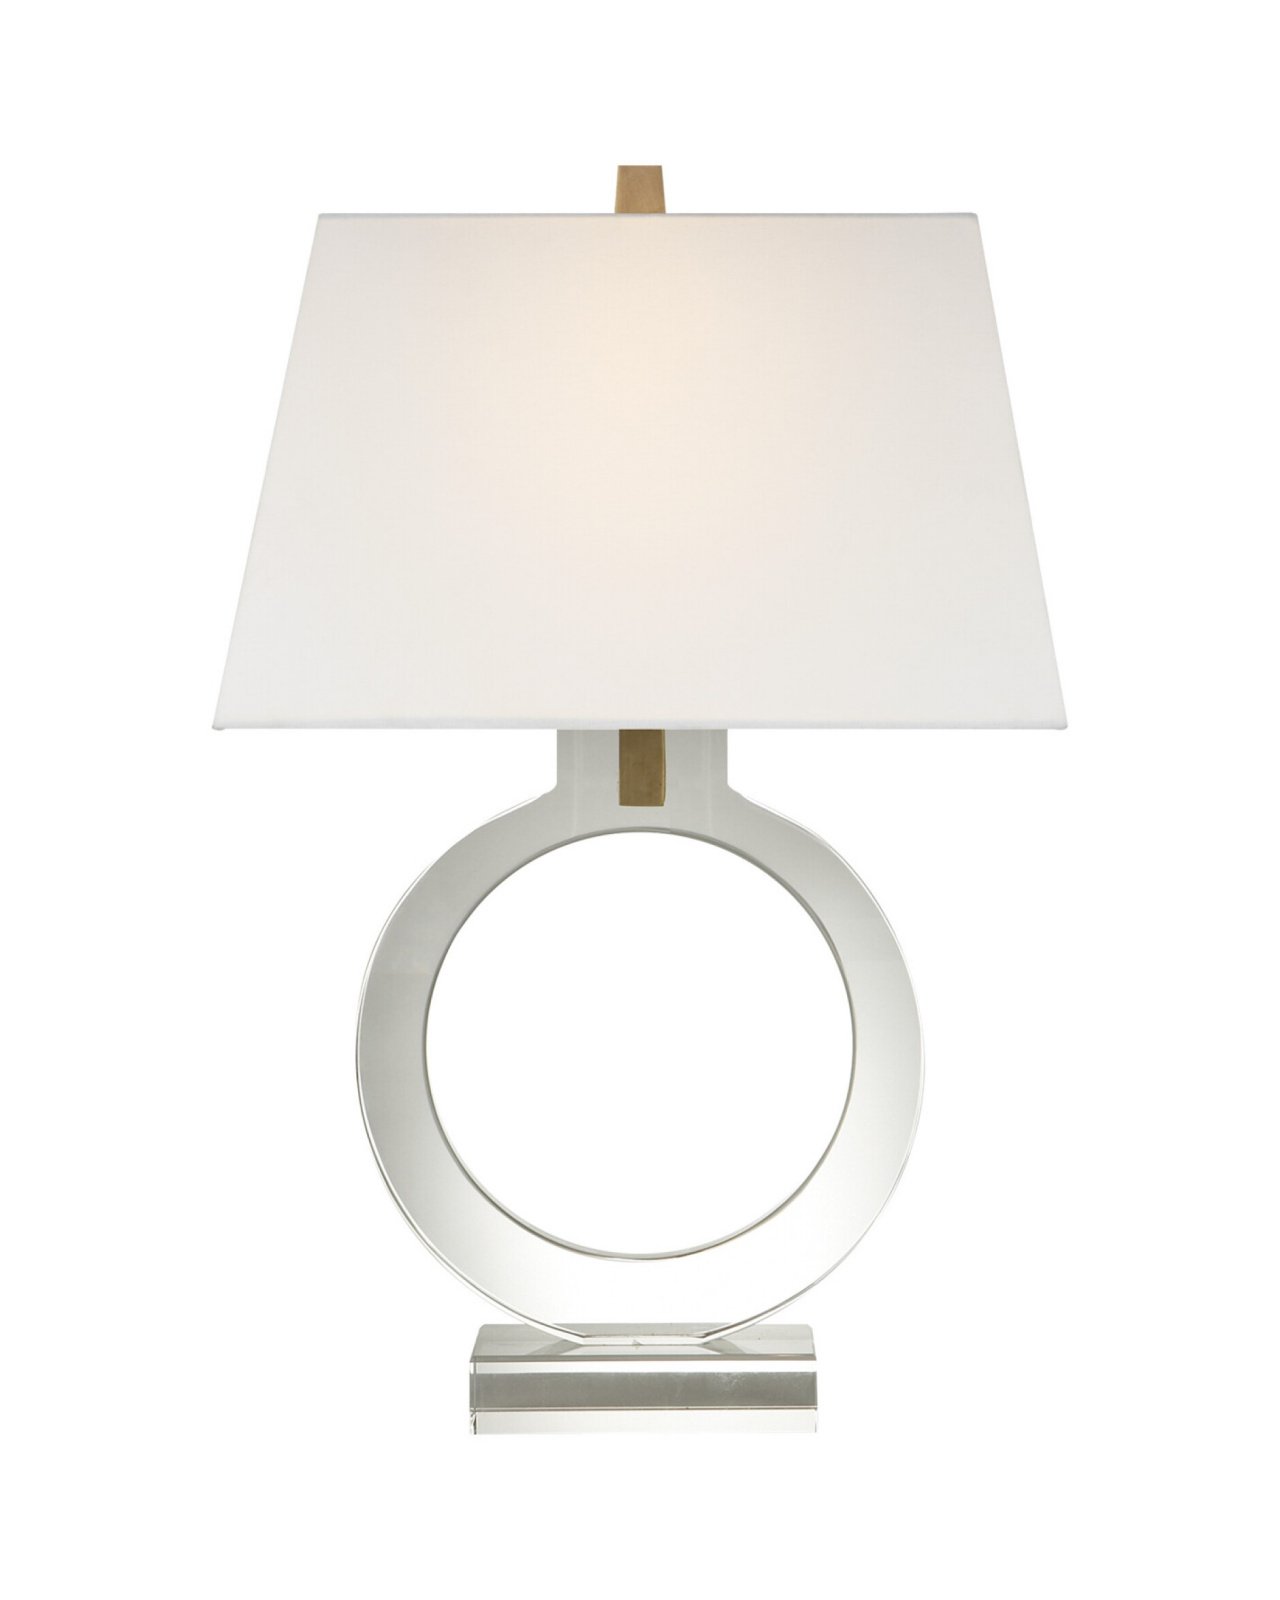 Ring Form Table Lamp Crystal Small